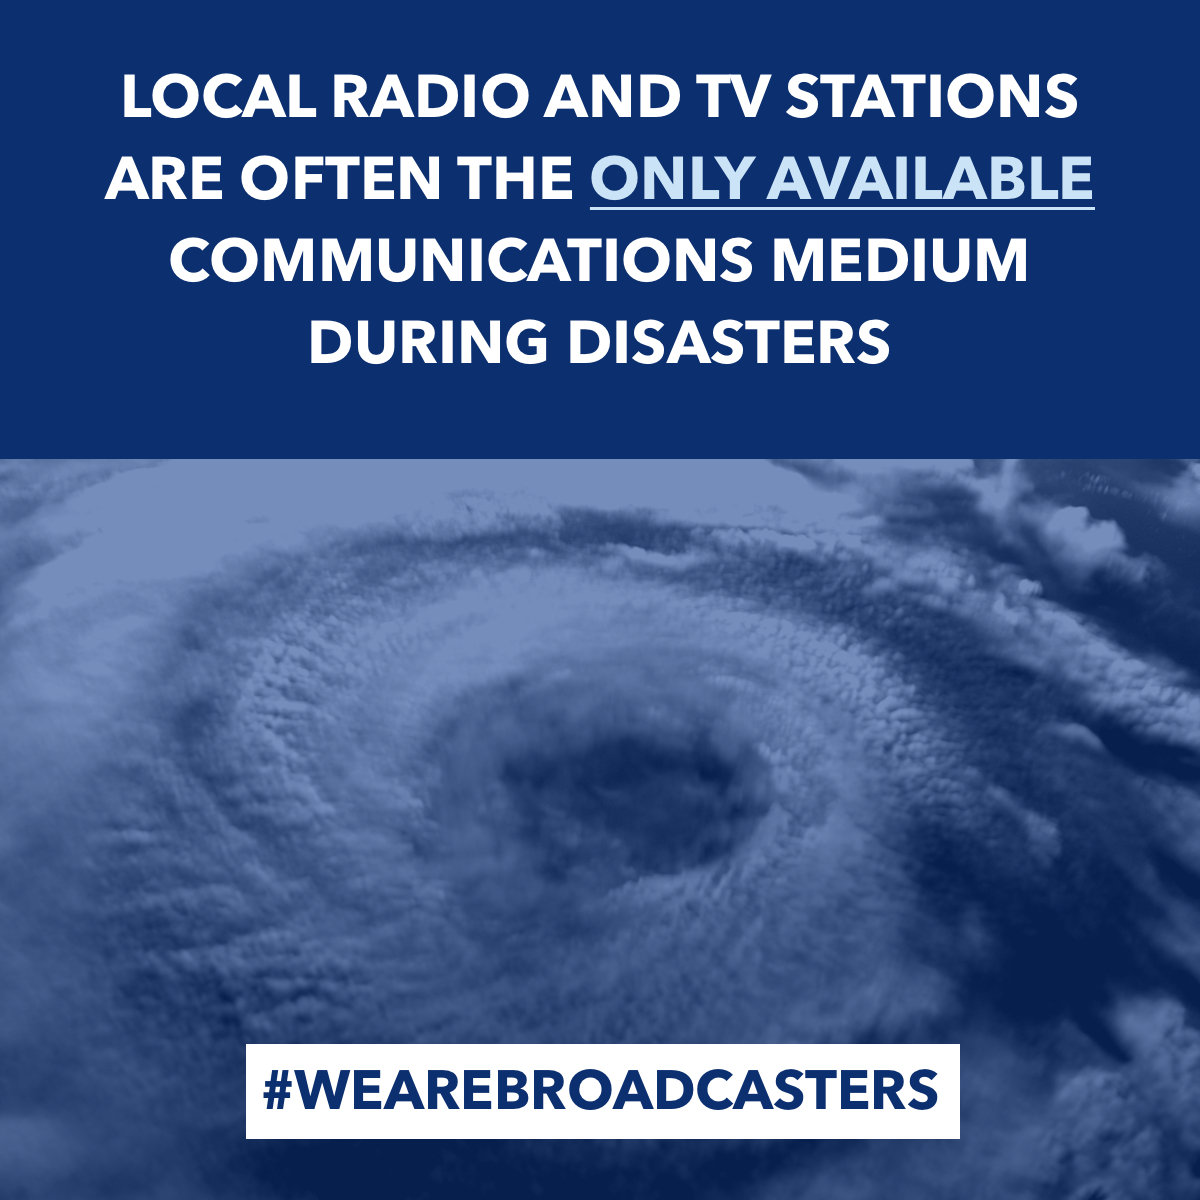 Local radio and TV stations are often the only available communications medium during disasters